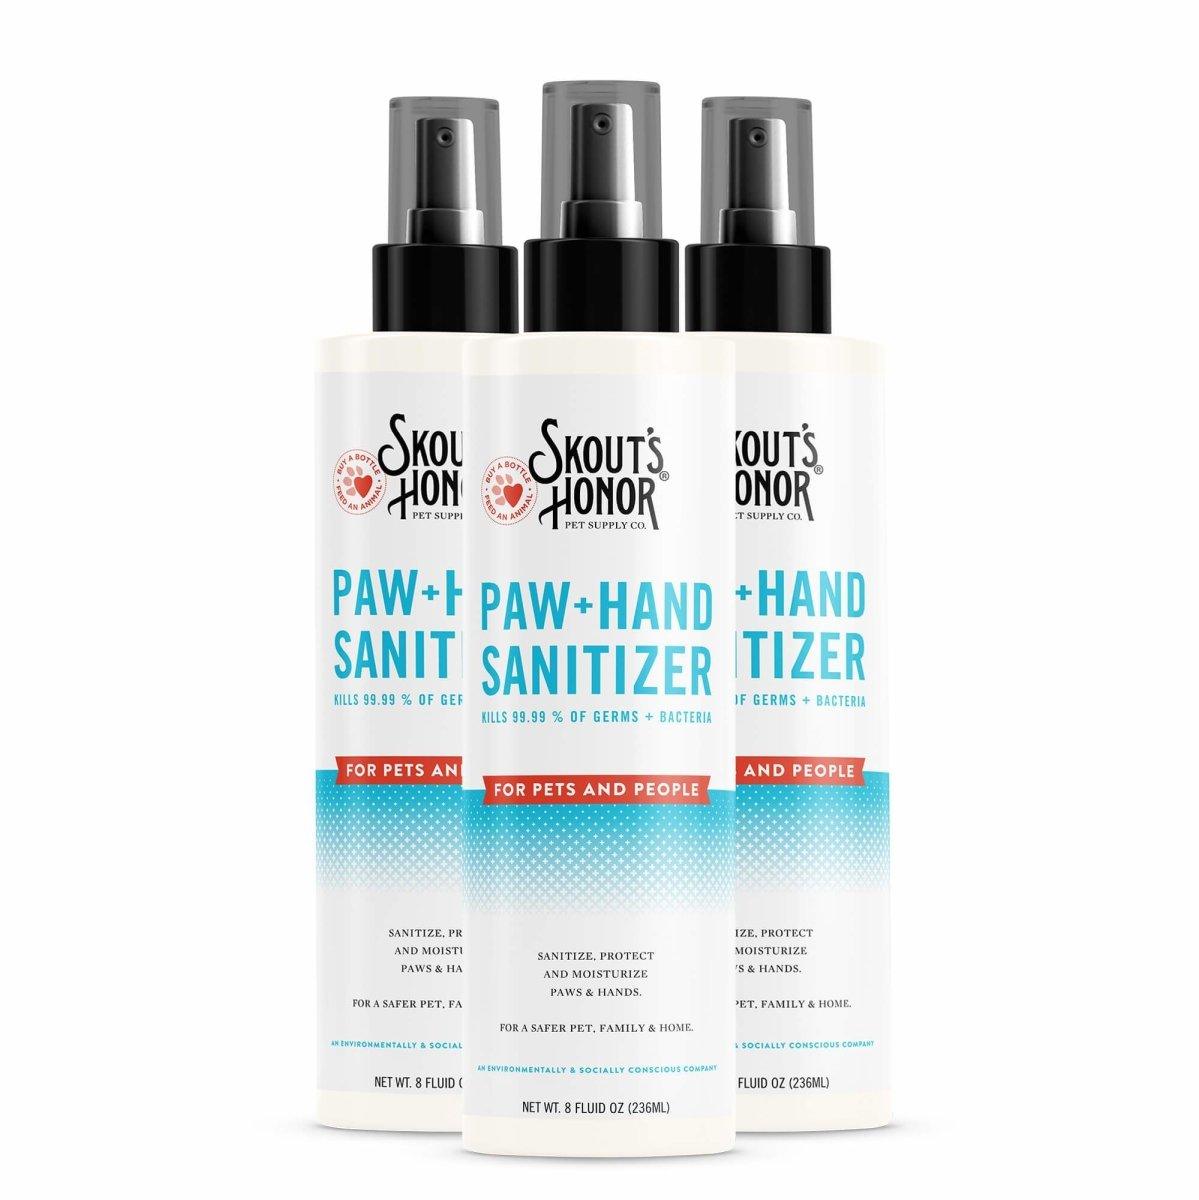 Topical Sanitizing Spray Safe for Dogs (Alcohol-free)